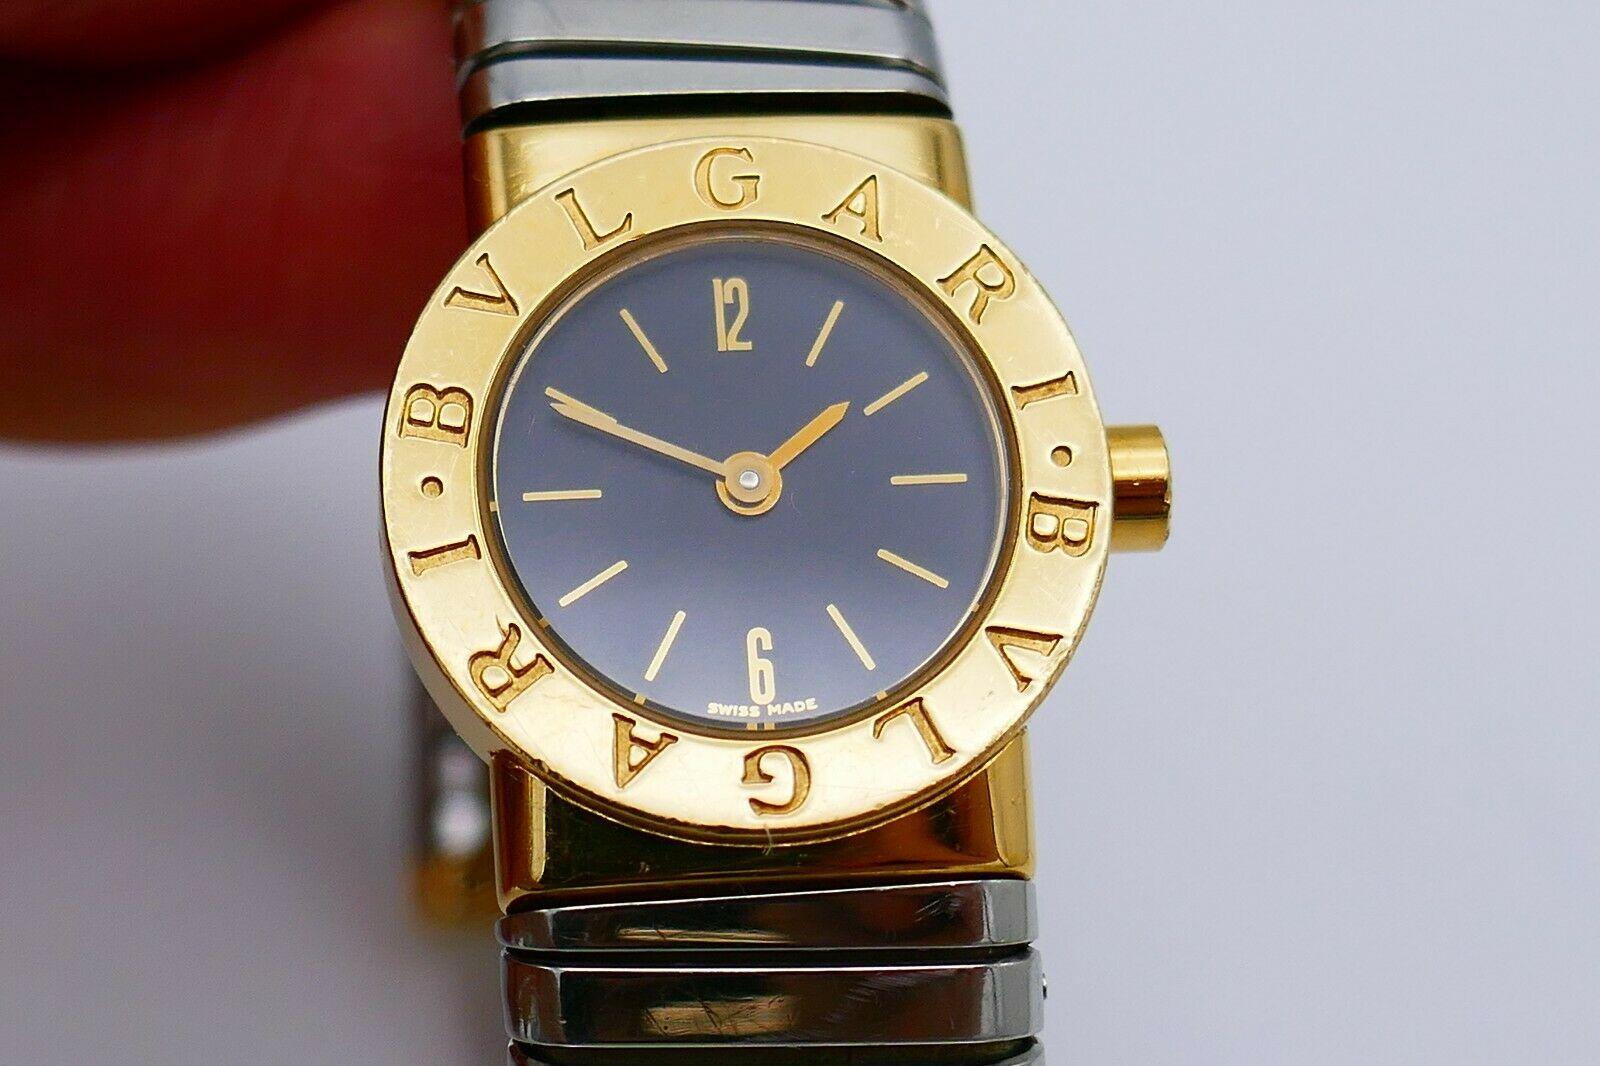 Bulgari Tubogas wrist watch with 18k yellow gold case and stainless steel bracelet. Model number BB 19 2T with quartz movement. Stamped with Bulgari maker's mark, a model and serial number and a country of origin (Switzerland). 
Measurements: will